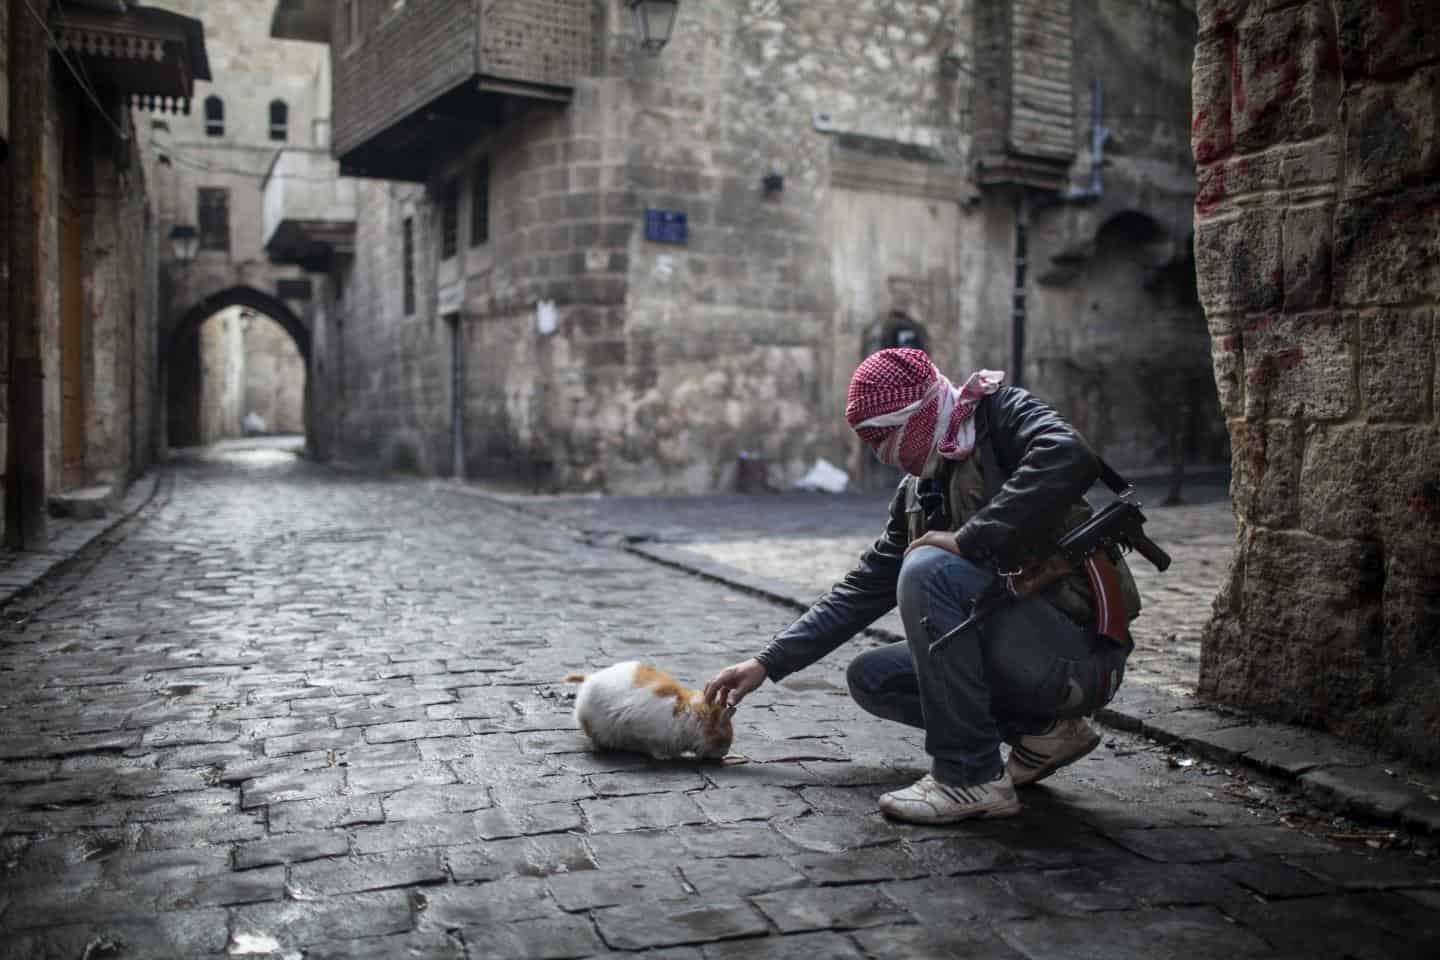 A Free Syrian Army fighter feeds a cat bread in the old city of Aleppo, Syria, January 6, 2013. Credit: AP via Newsweek 